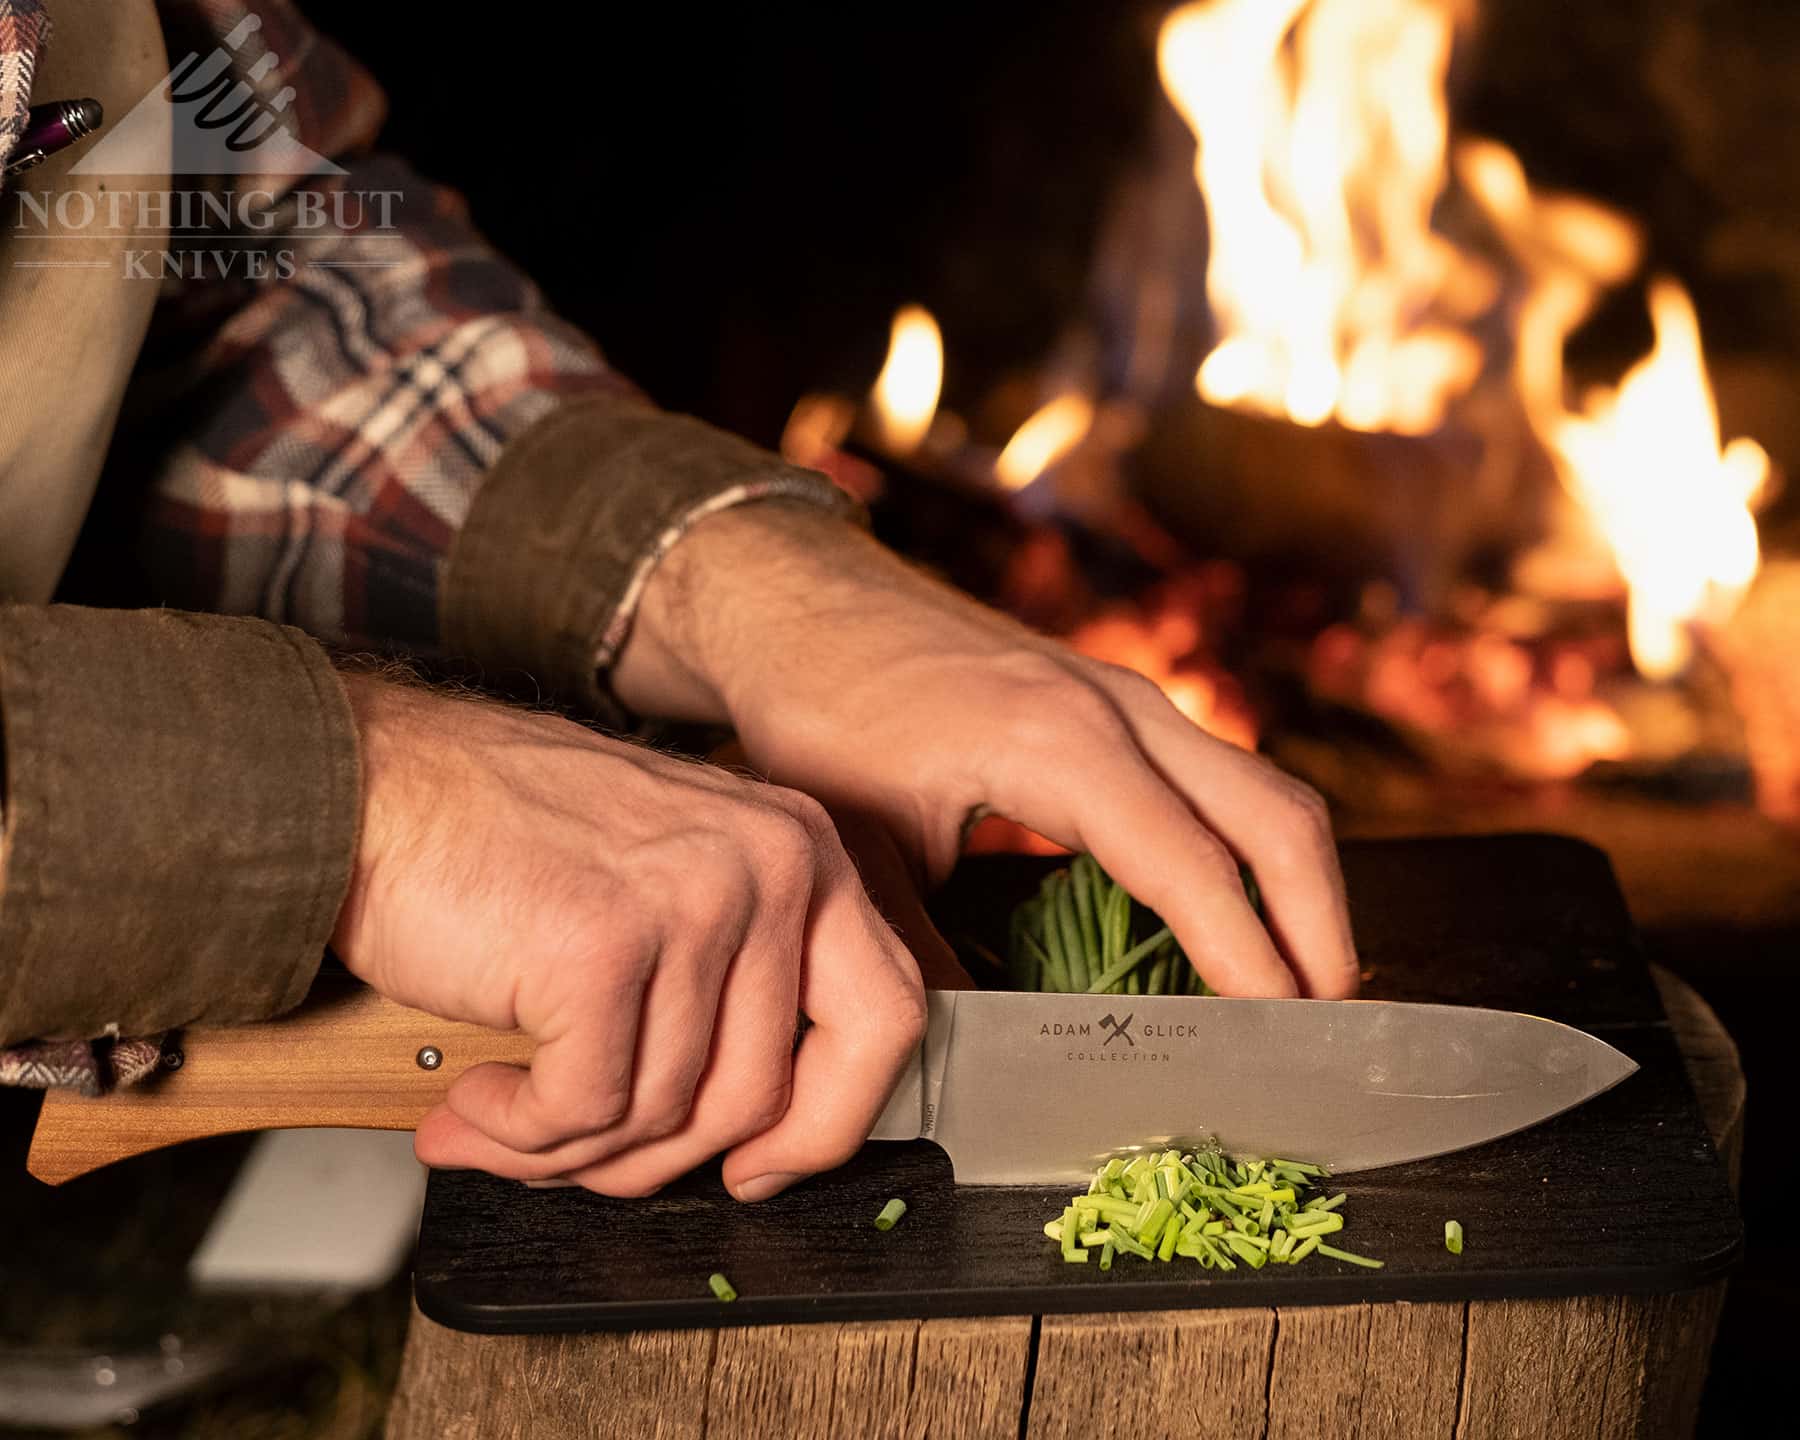 Our Search For The Best Camping Chef Knife